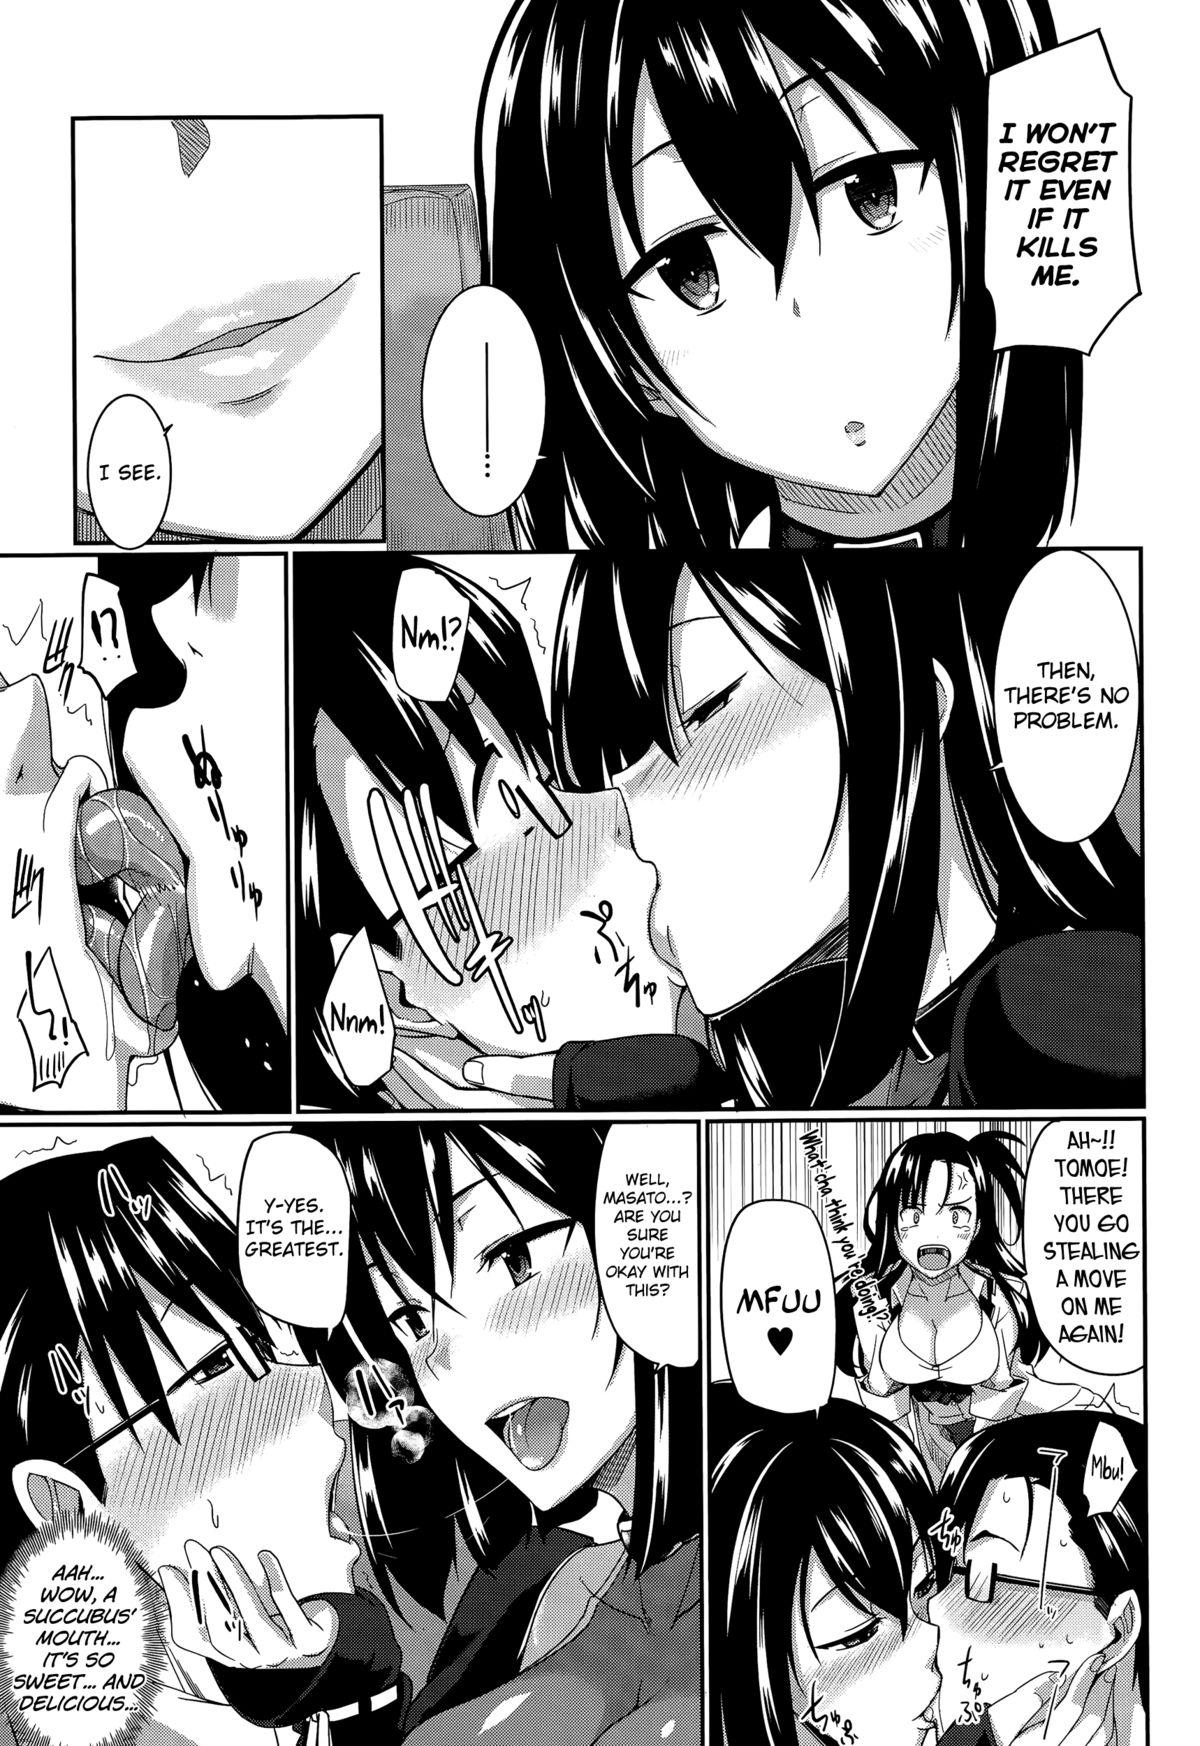 Assfucking Inma no Mikata! | Succubi's Supporter! Ch. 1-3 Cum On Face - Page 11